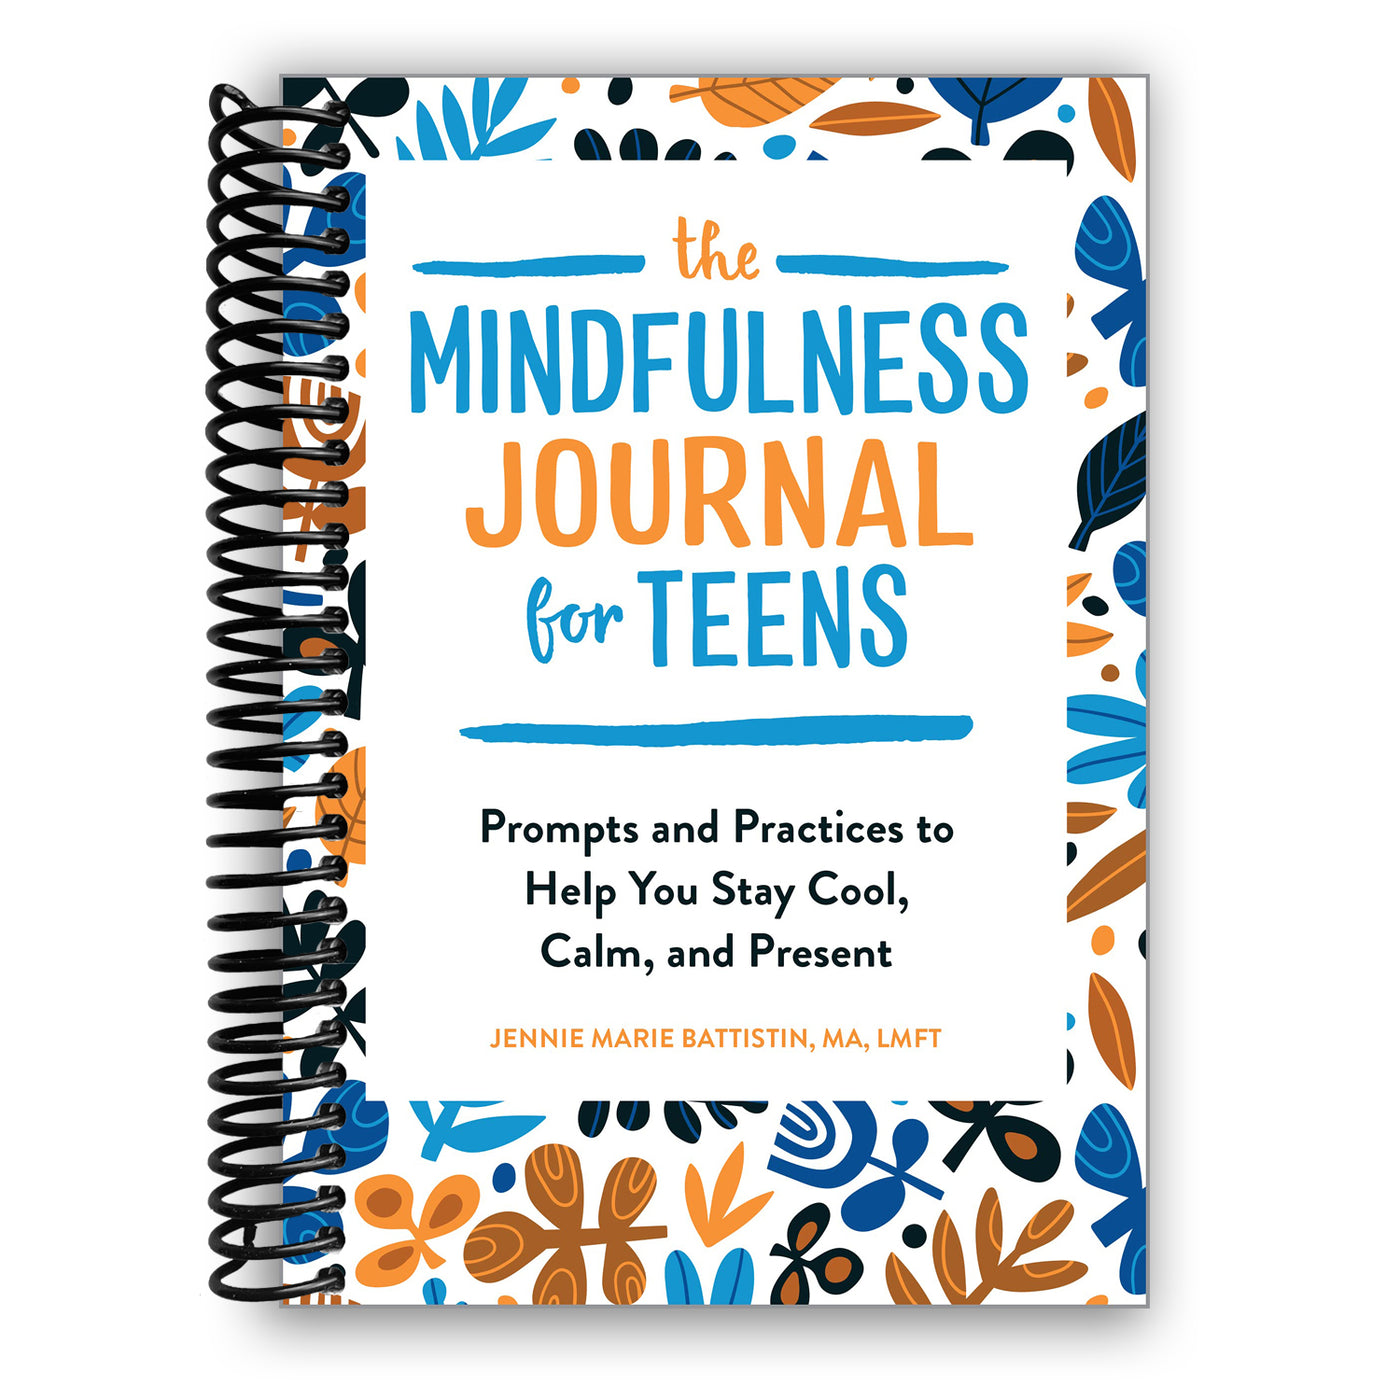 The Mindfulness Journal for Teens: Prompts and Practices to Help You Stay Cool, Calm, and Present (Spiral Bound)